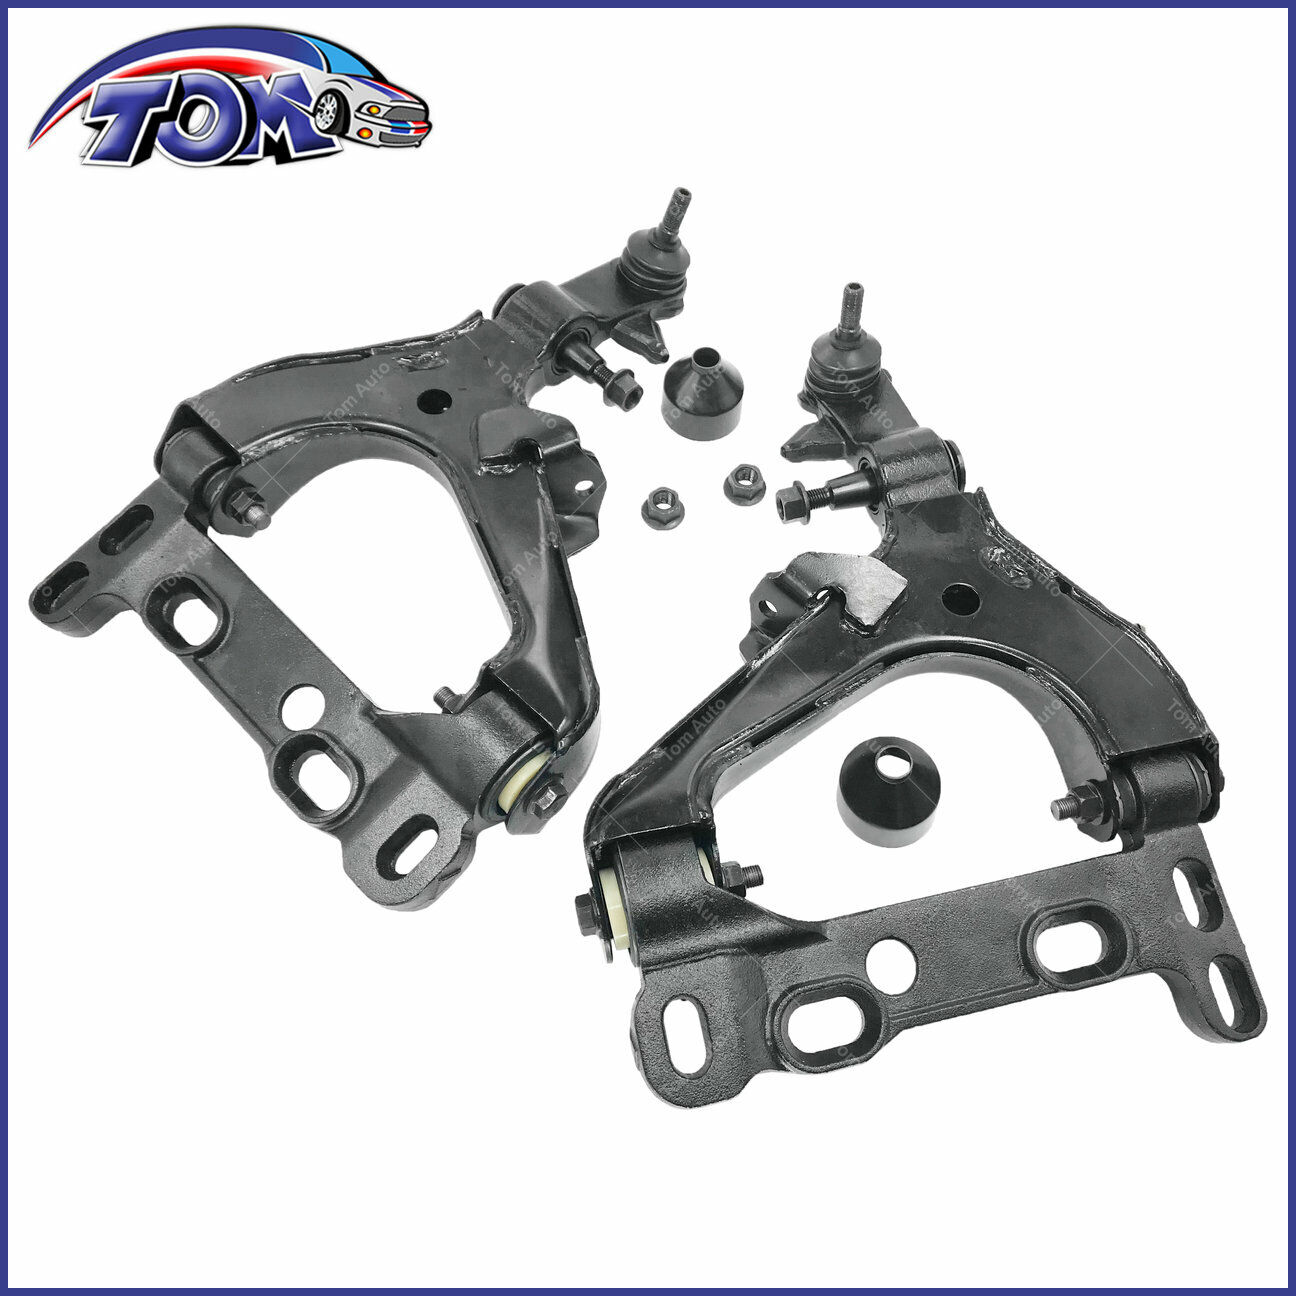 2PCS Front Lower Control Arm Ball Joint For 2004-07 Chevy Trailblazer GMC Envoy